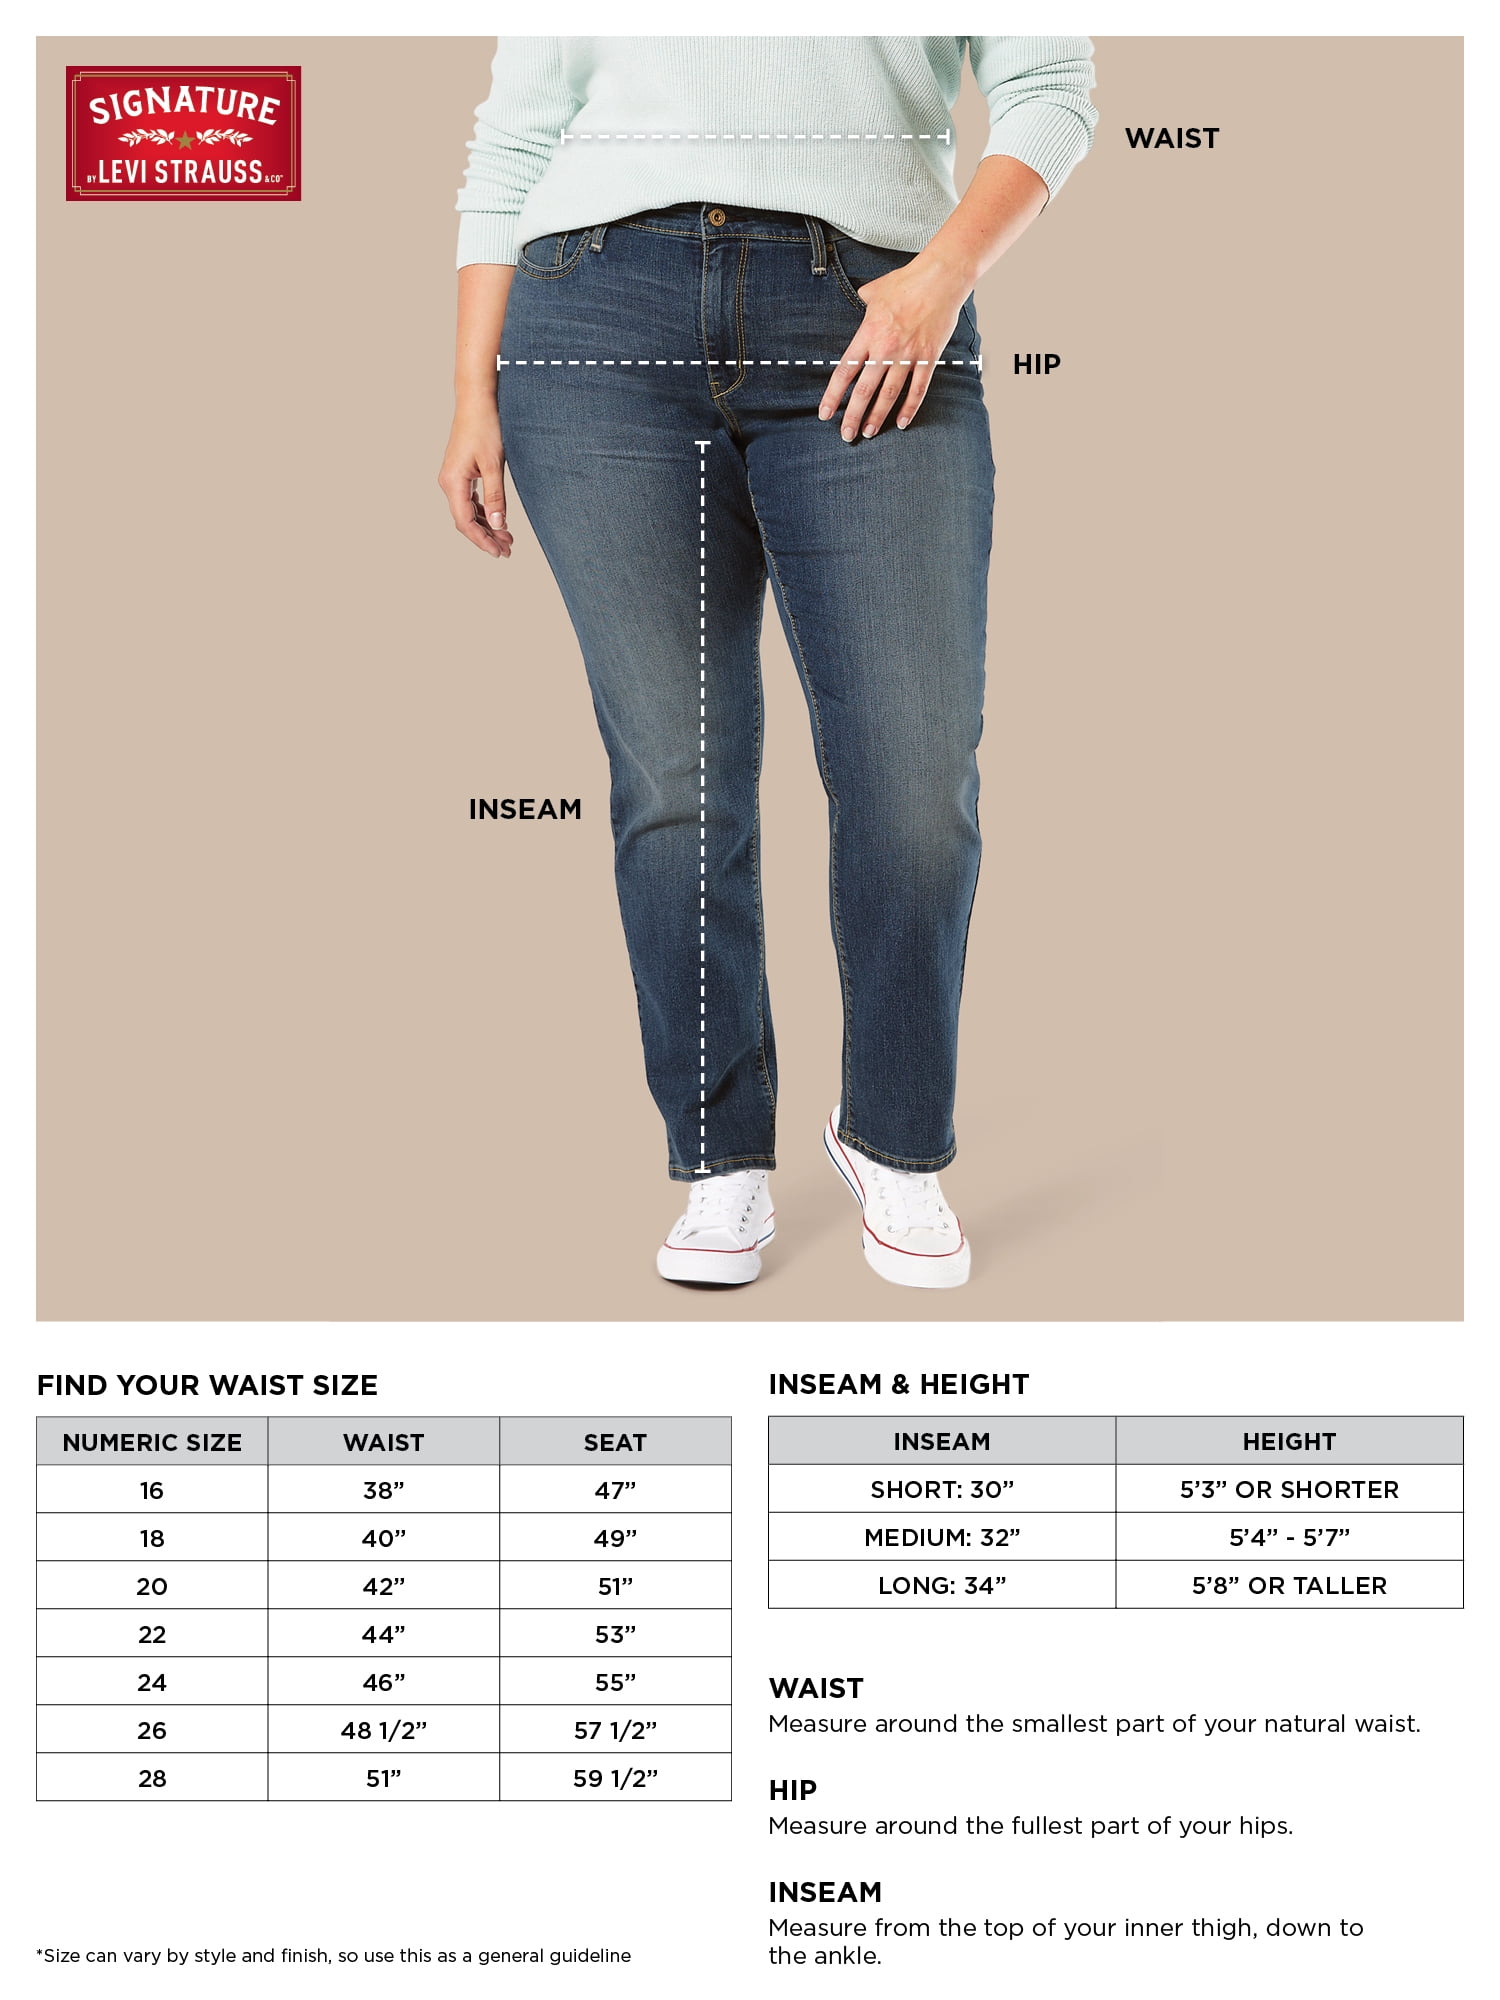 levi strauss size guide